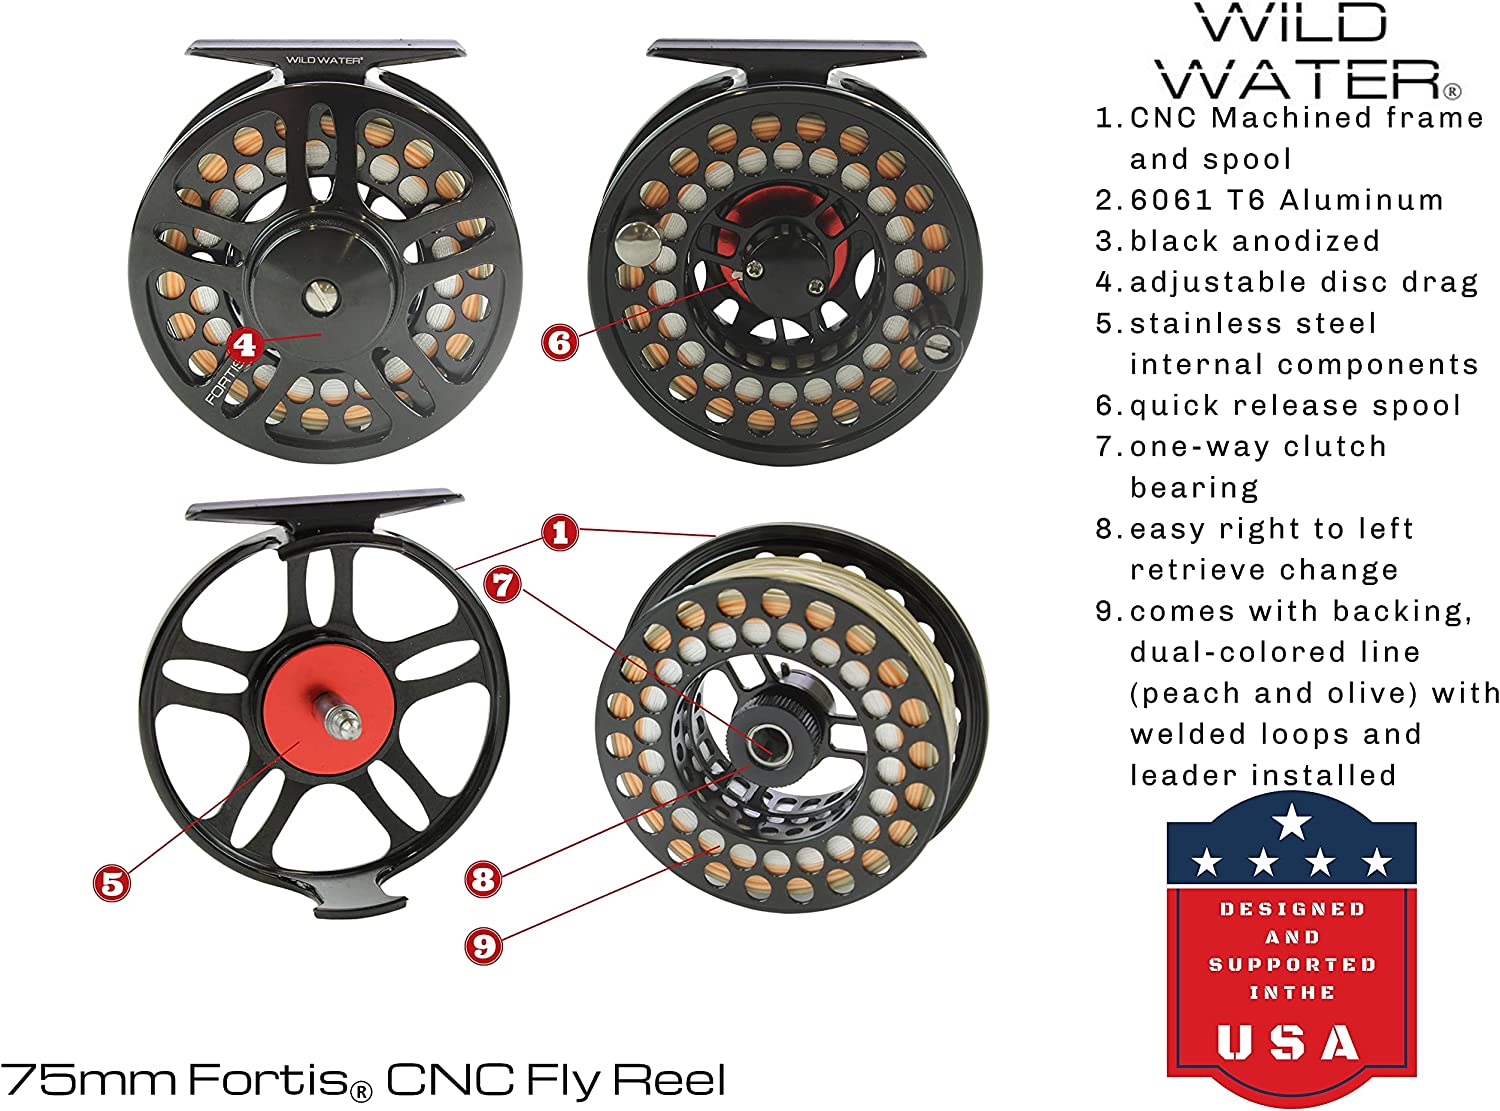 Wild Water CNC Fly Reel Fly Fishing Kit - 7 ft 3/4 wt